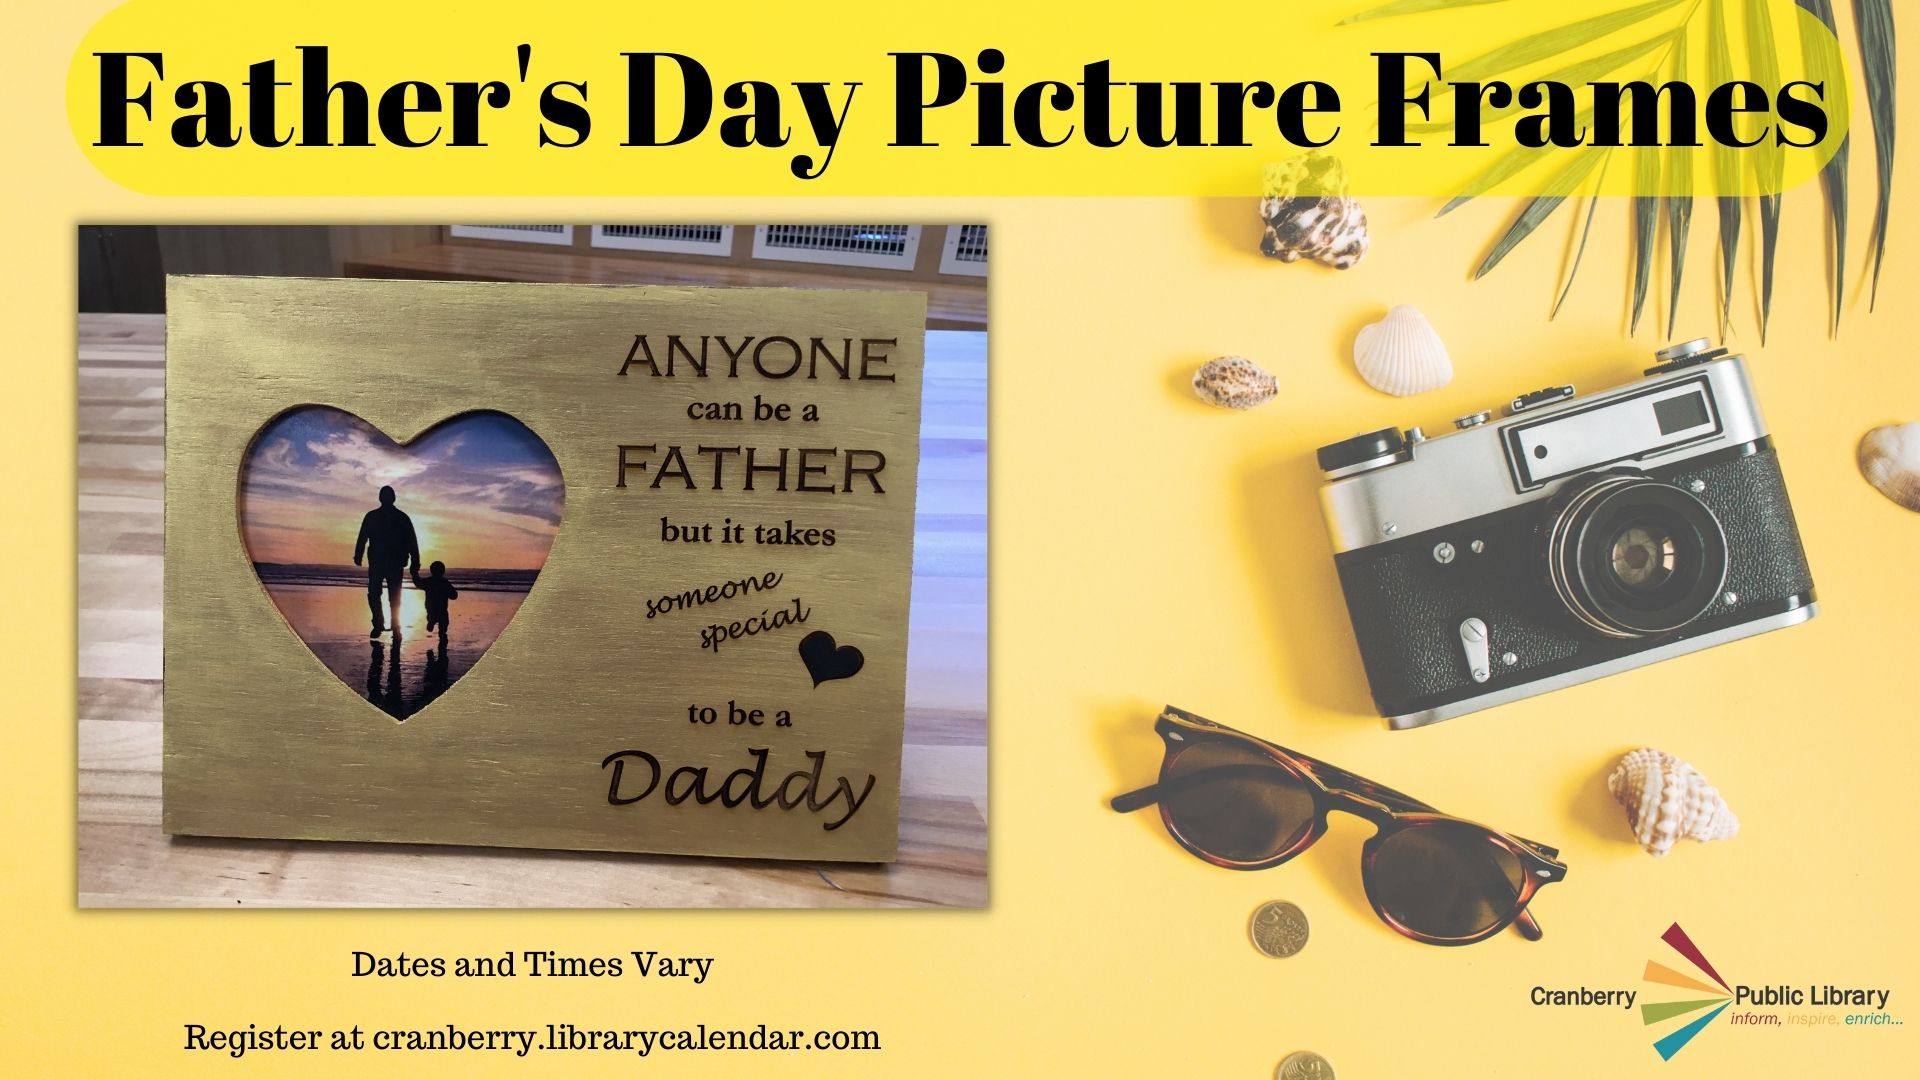 Flyer for Father's Day Picture Frames class